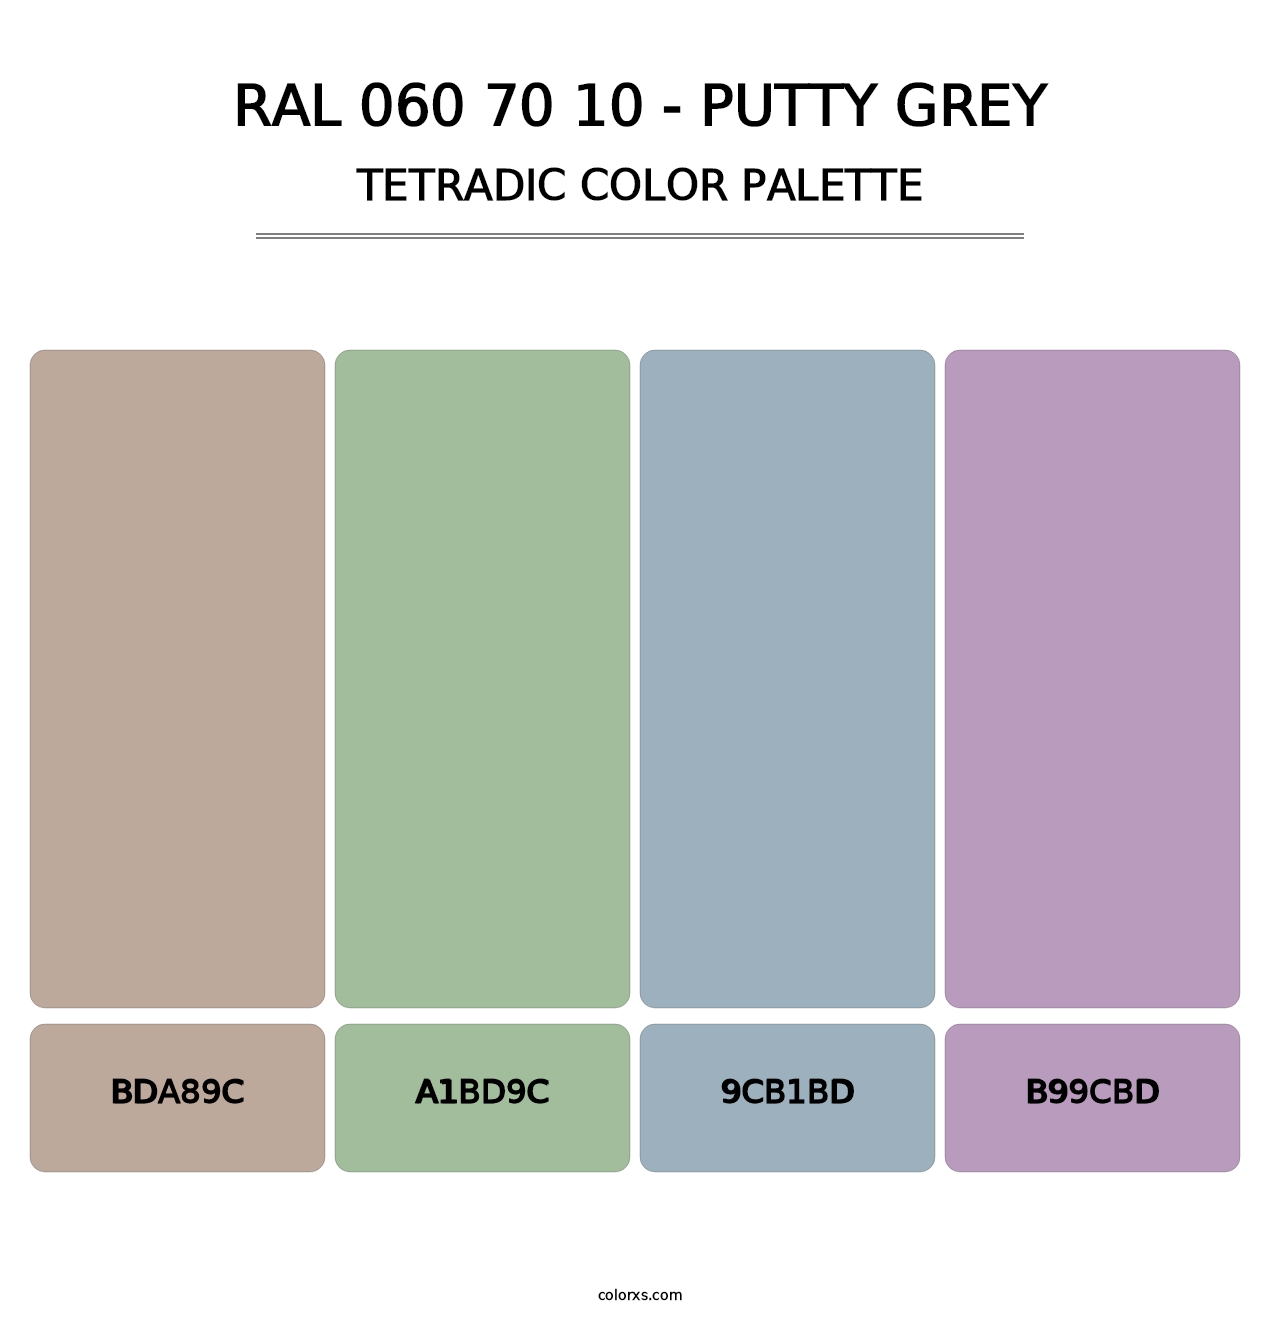 RAL 060 70 10 - Putty Grey - Tetradic Color Palette